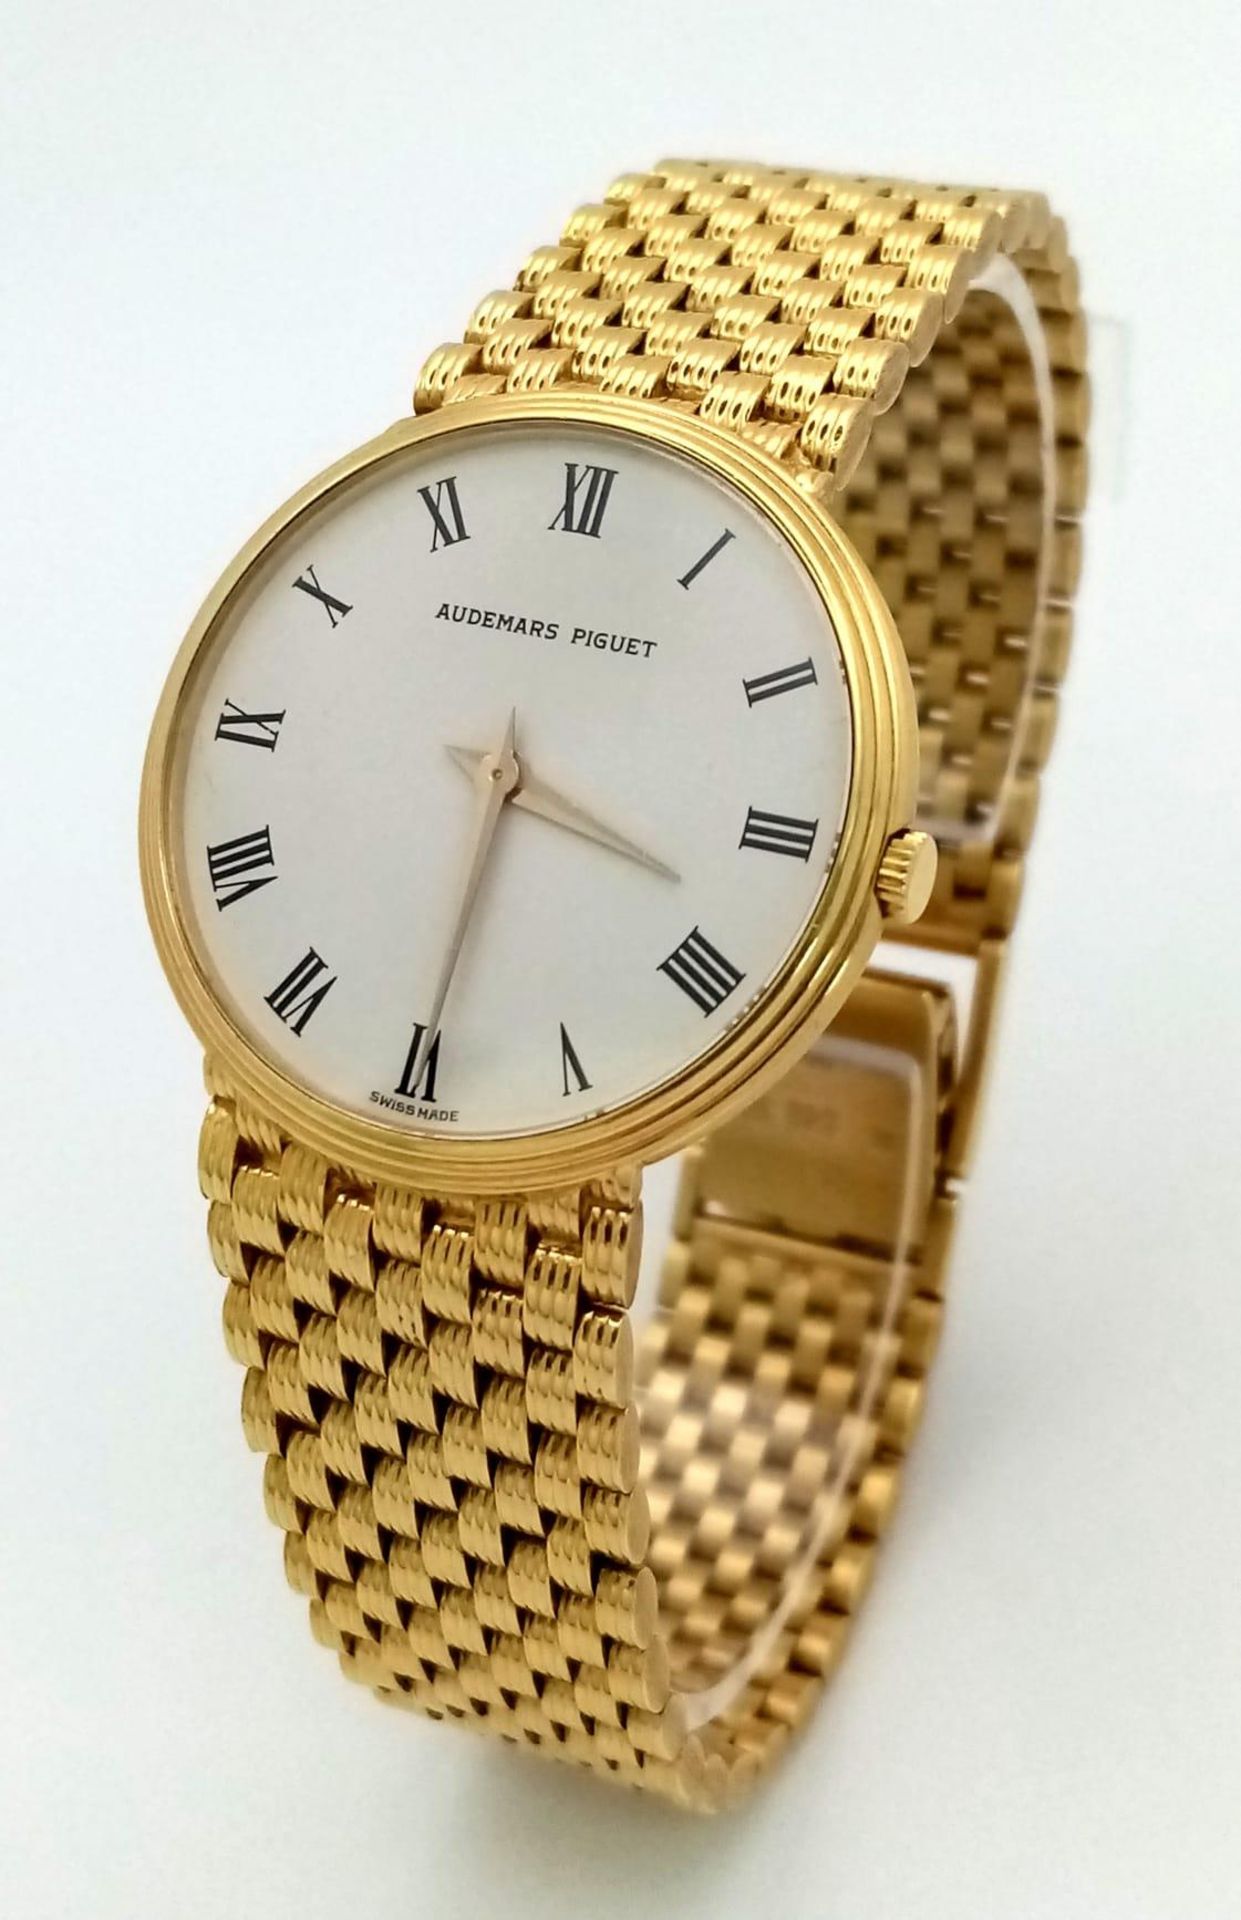 A SOLID 18K GOLD AUDEMARS PIGUET GENTS DRESS WATCH WITH WHITE DIAL AND ROMAN NUMERALS , MANUAL